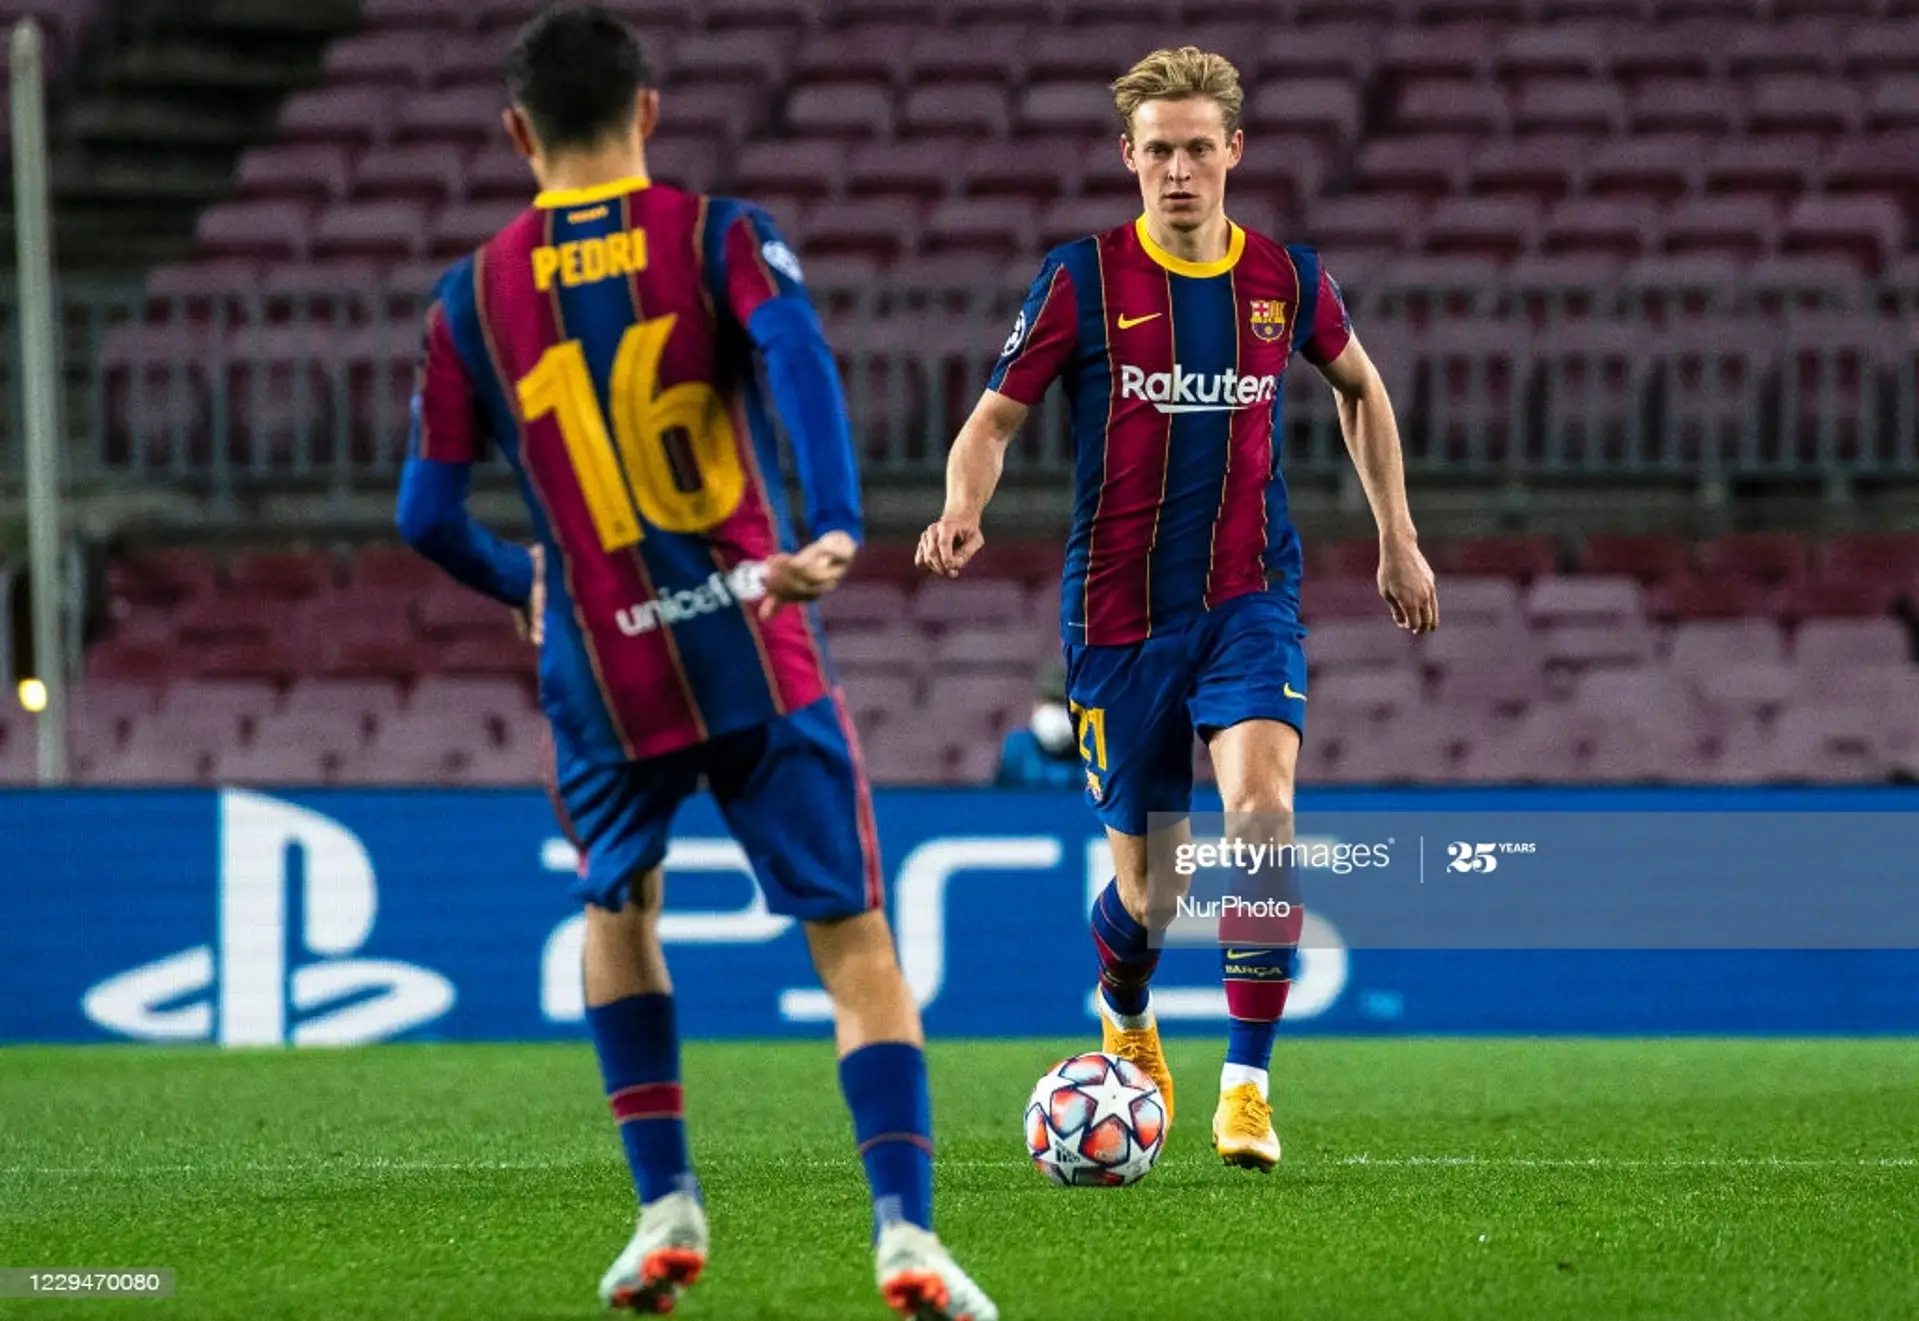 Frenkie De Jong and Pedri, the next midfield maestros or the solution to Barca’s left back problem?